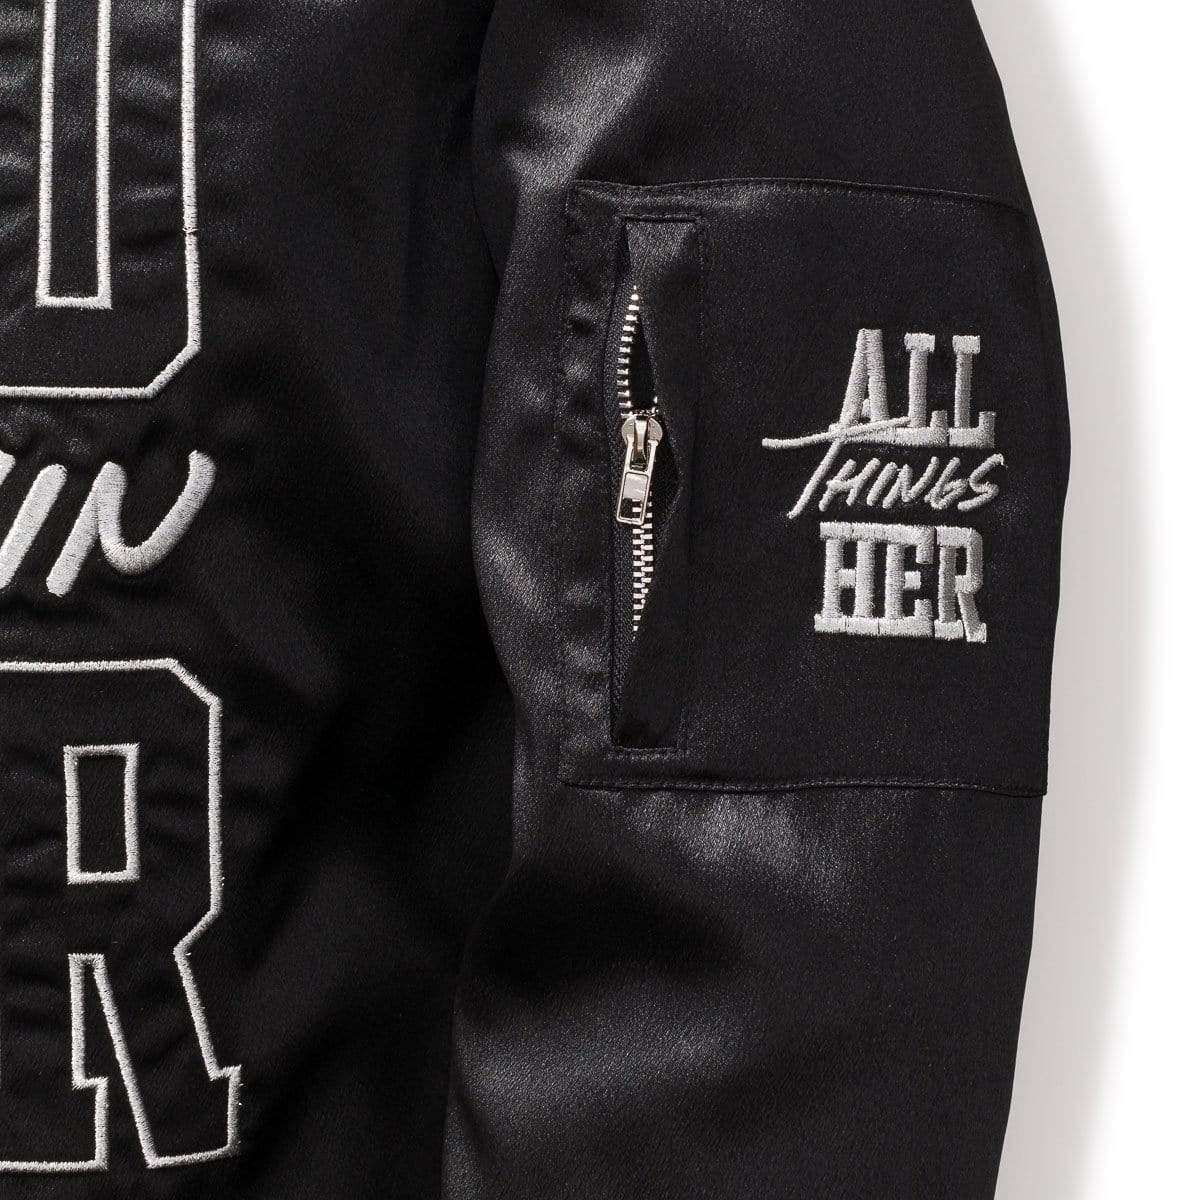 3:16 Collection Jacket WITHIN HER - WOMEN&#39;S BOMBER JACKET - BLACK